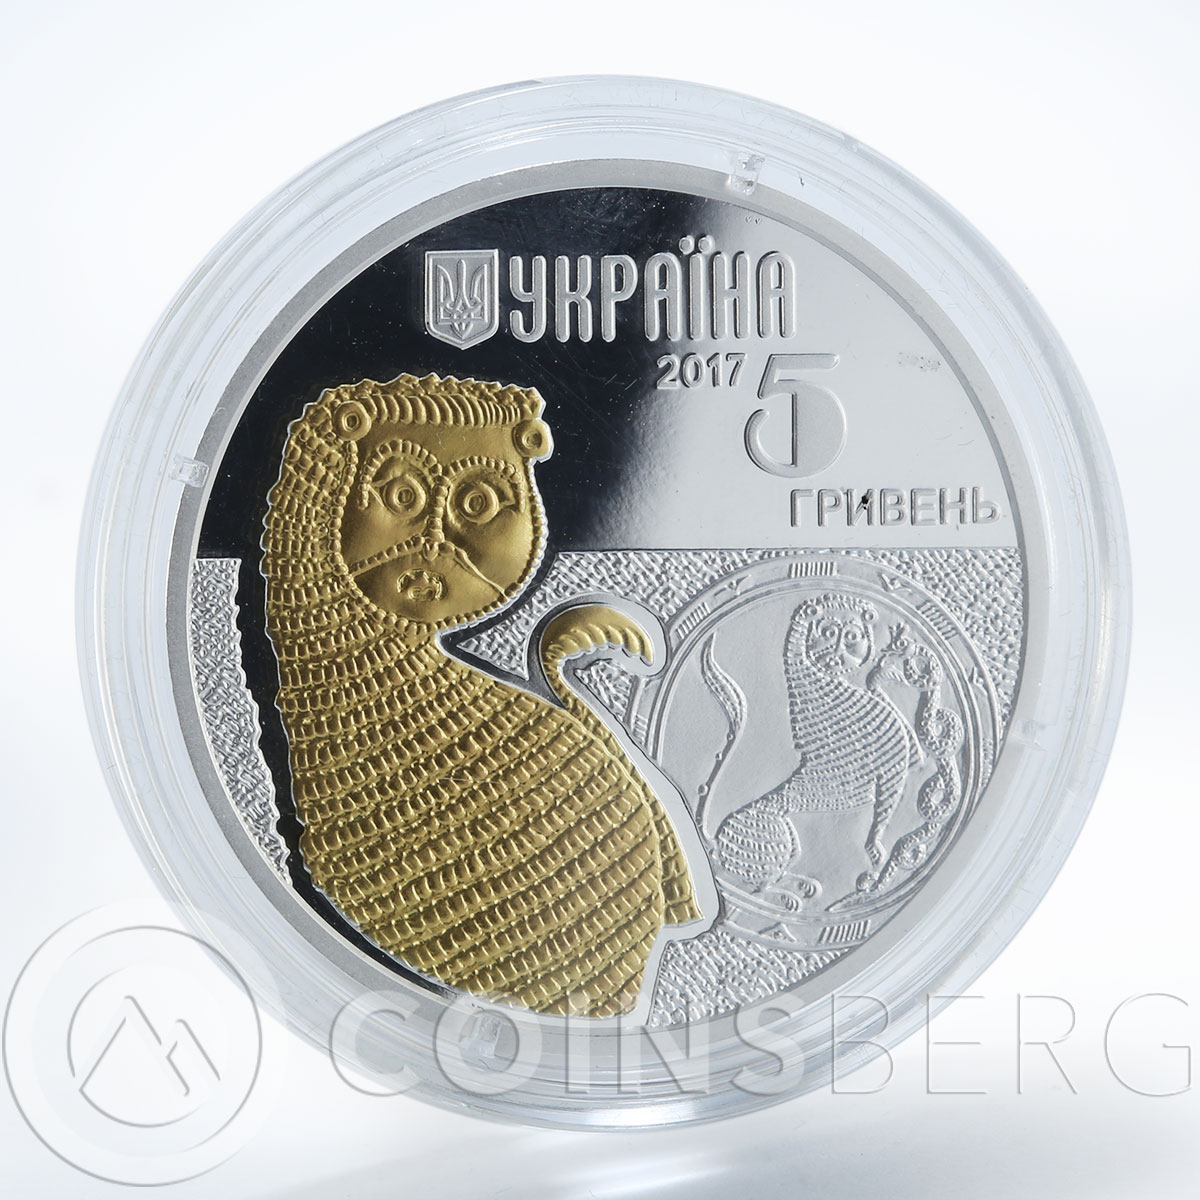 Ukraine 5 hryvnia Lion Fauna in Cultural Monuments silver proof coin 2017